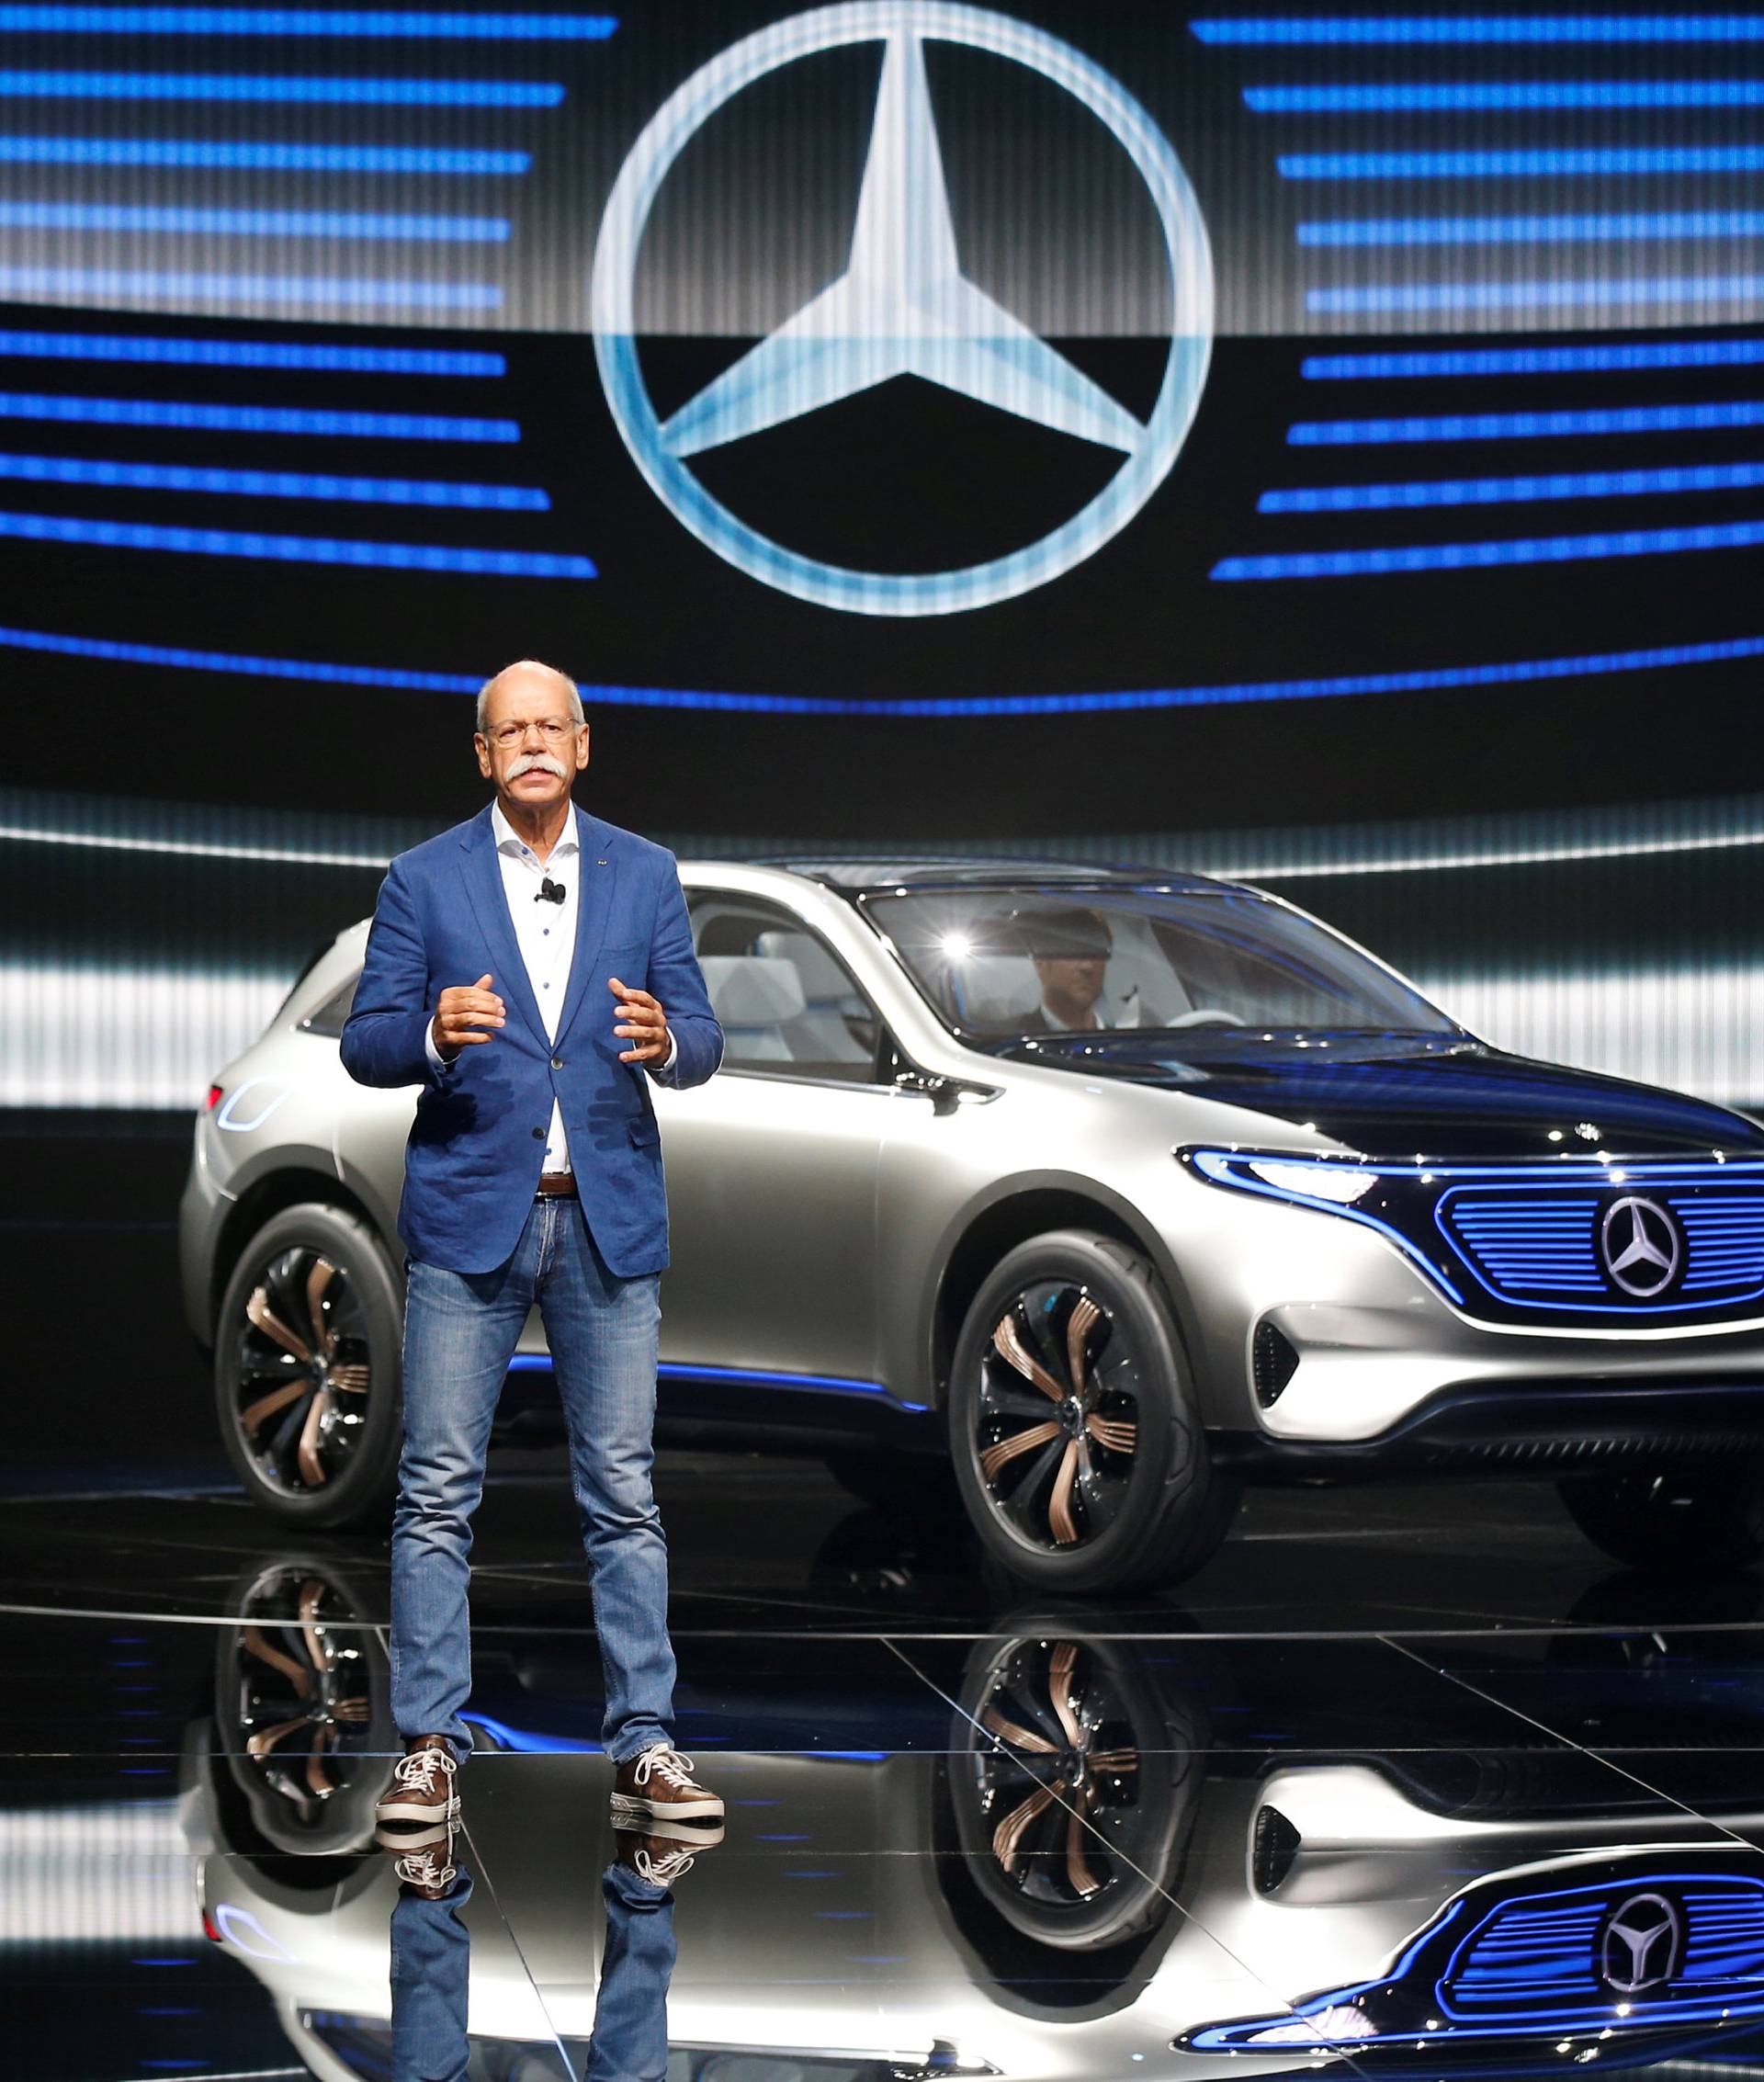 Dieter Zetsche, CEO of Daimler and Head of Mercedes-Benz, attends a news conference in front of a Mercedes EQ Electric car on media day at the Mondial de l'Automobile in Paris